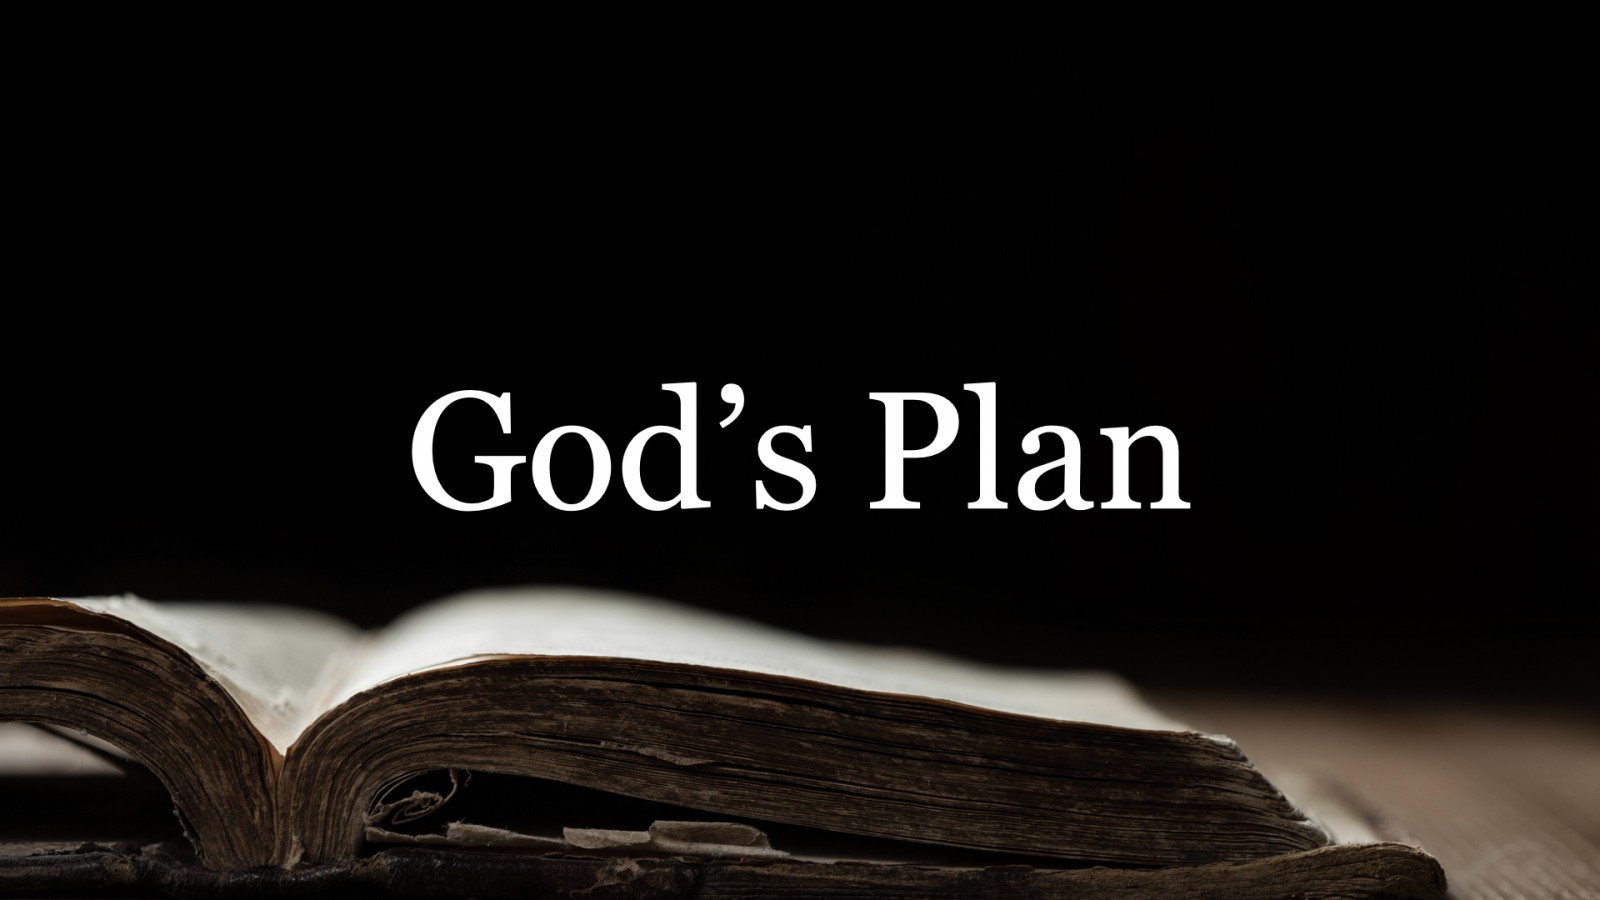 Devout Christians: The Power of Choice - Understanding God's Plan for Humanity and Free Will.